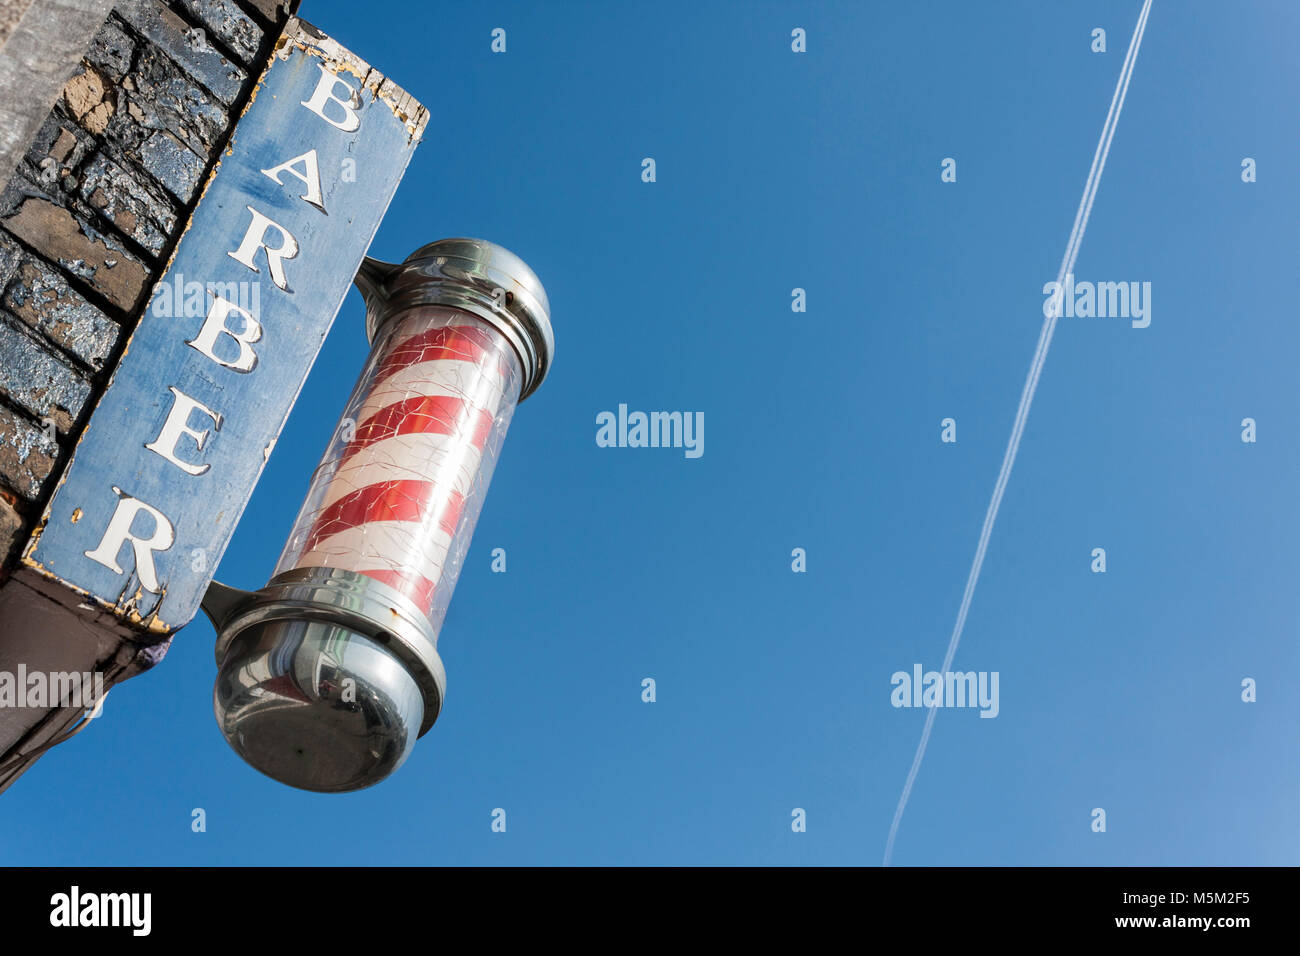 Traditional red and white barbers pole outside men's hairdressers Stock Photo